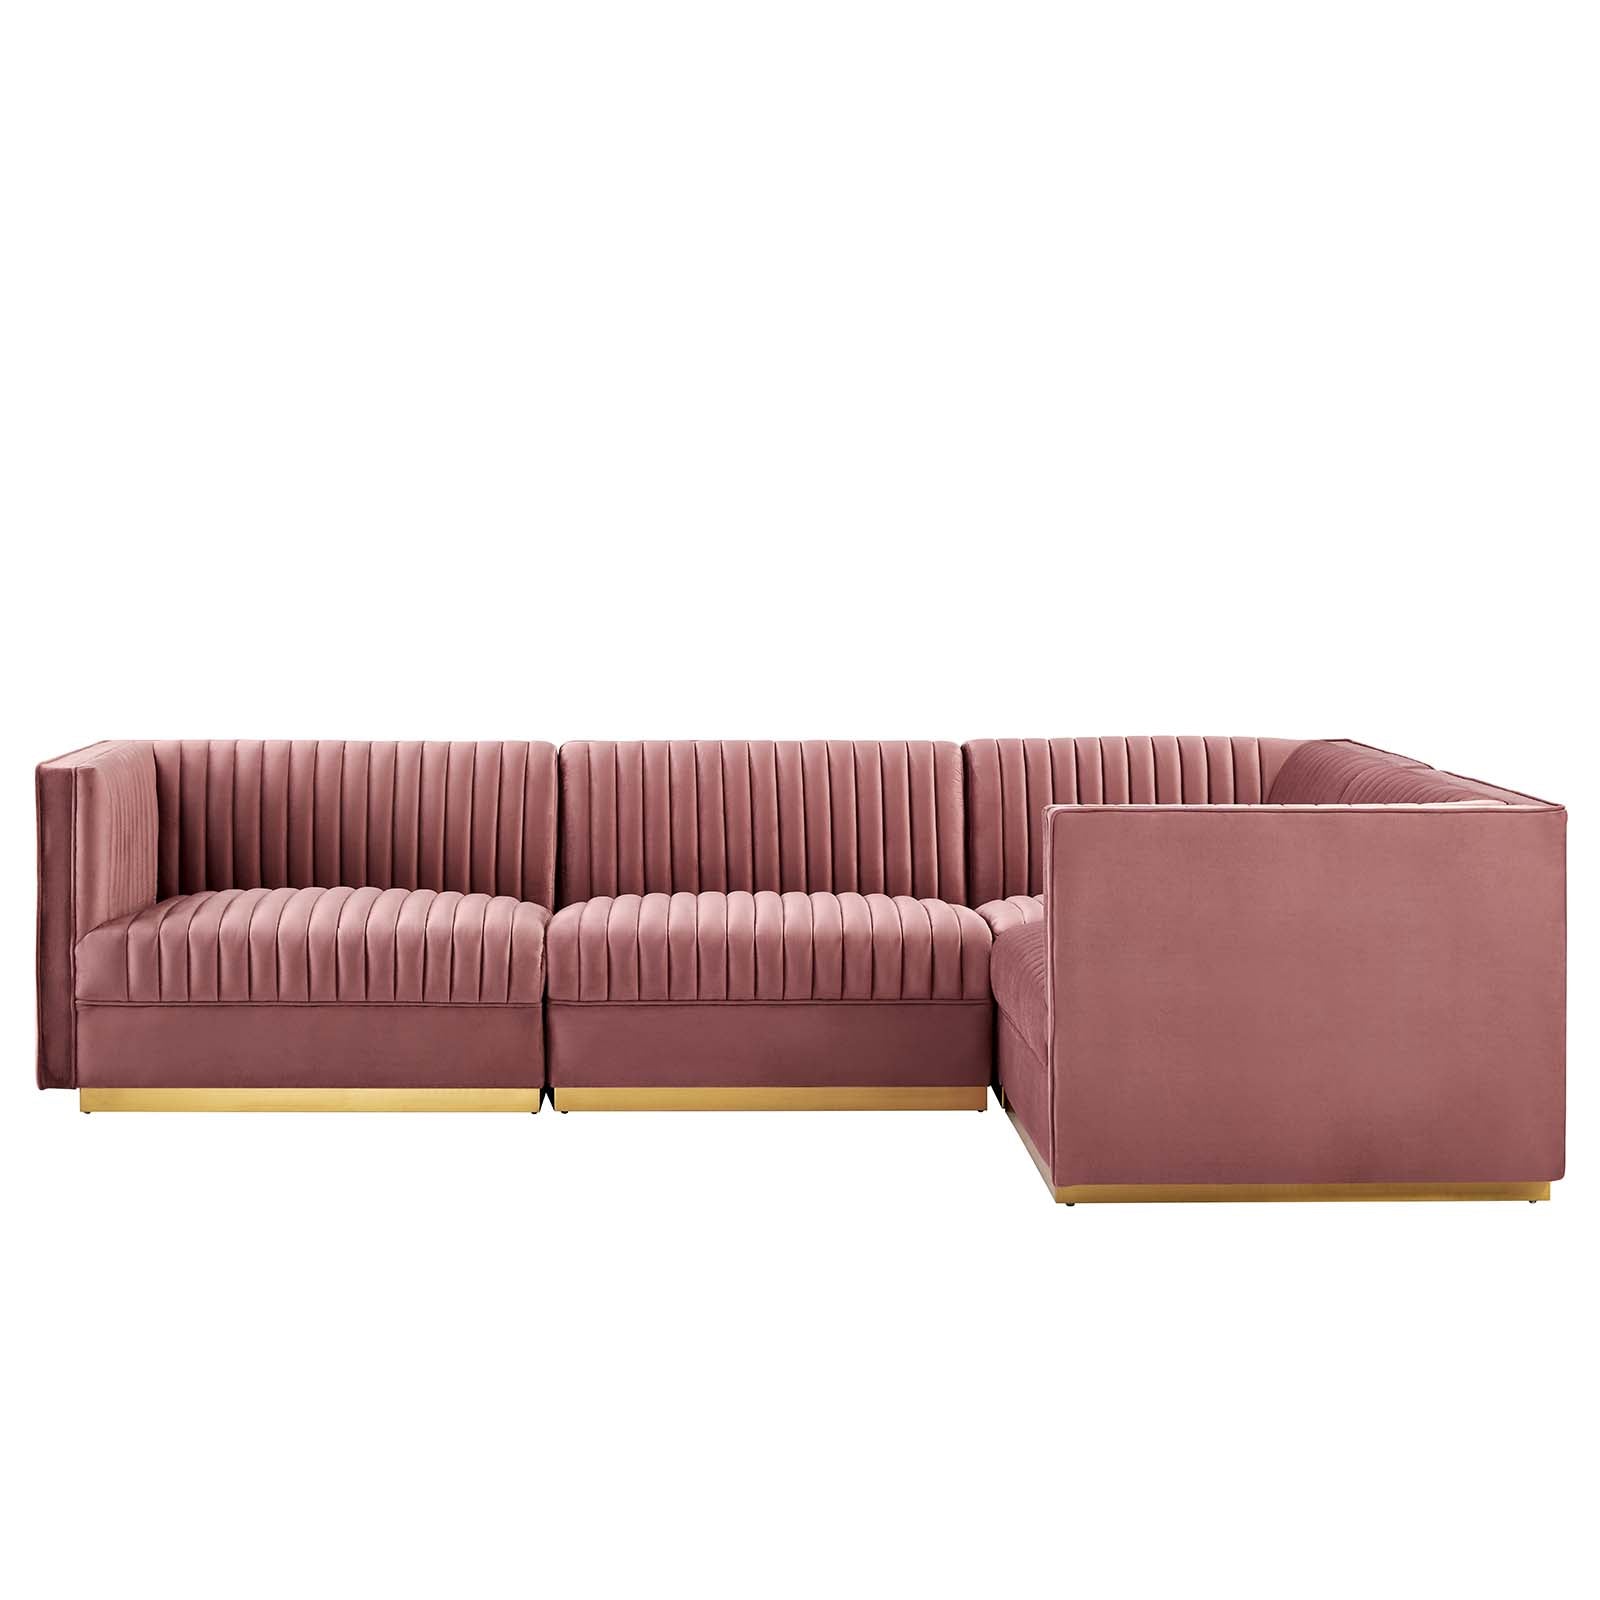 Sanguine Channel Tufted Performance Velvet 4-Piece Right-Facing Modular Sectional Sofa